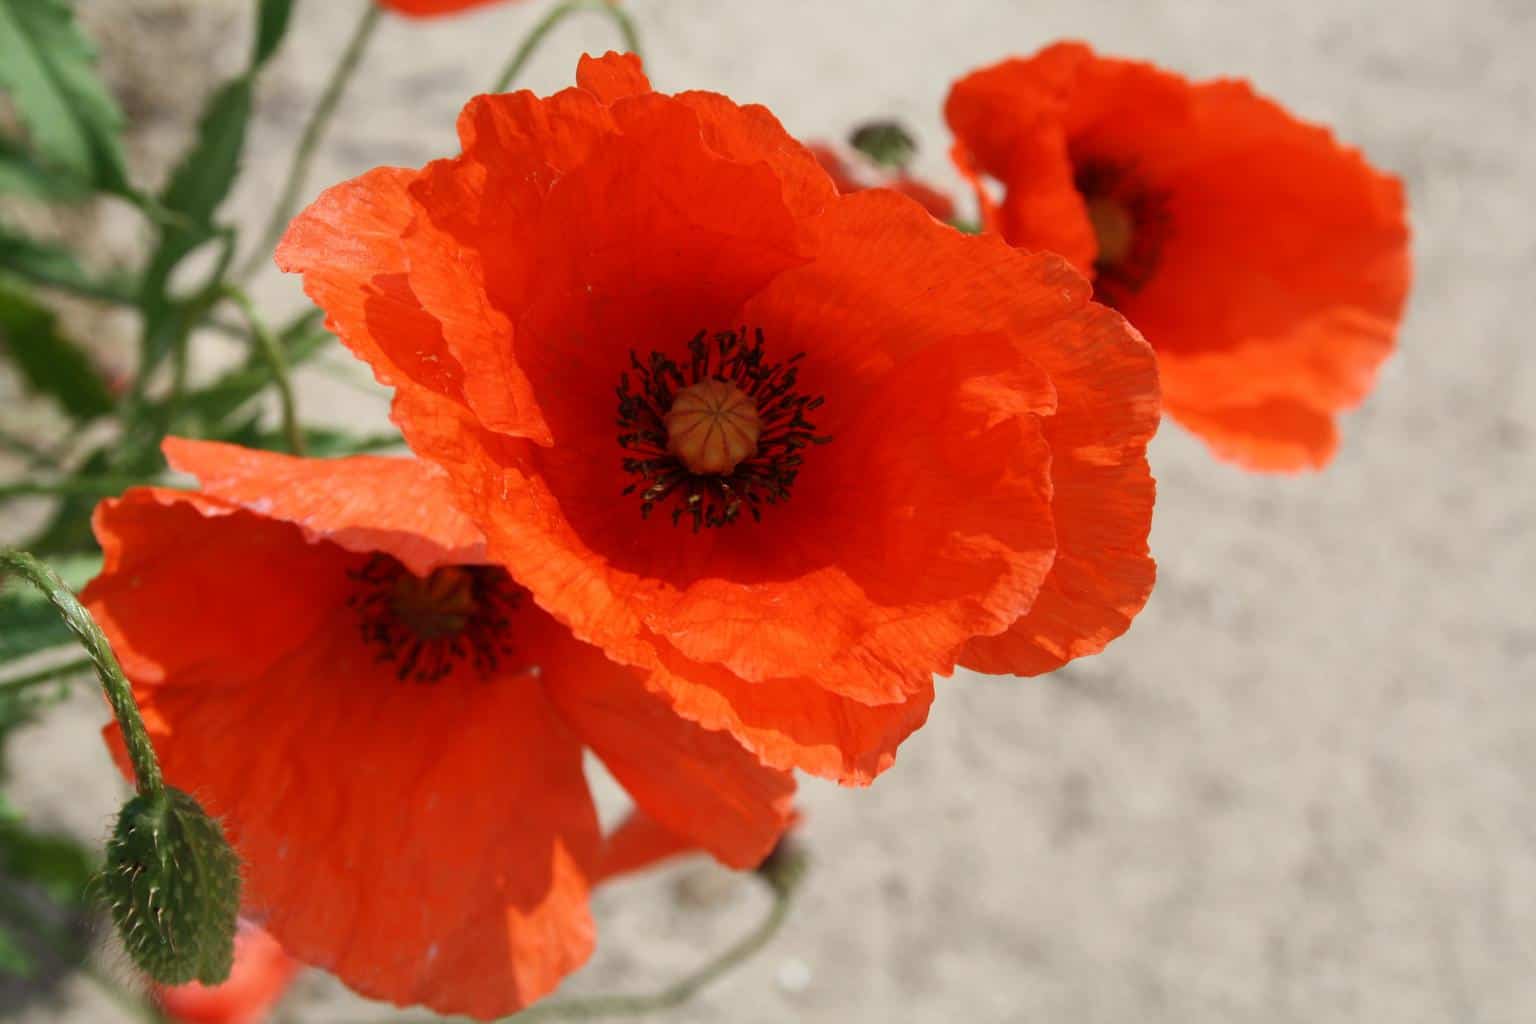 Poppy meaning and symbolism